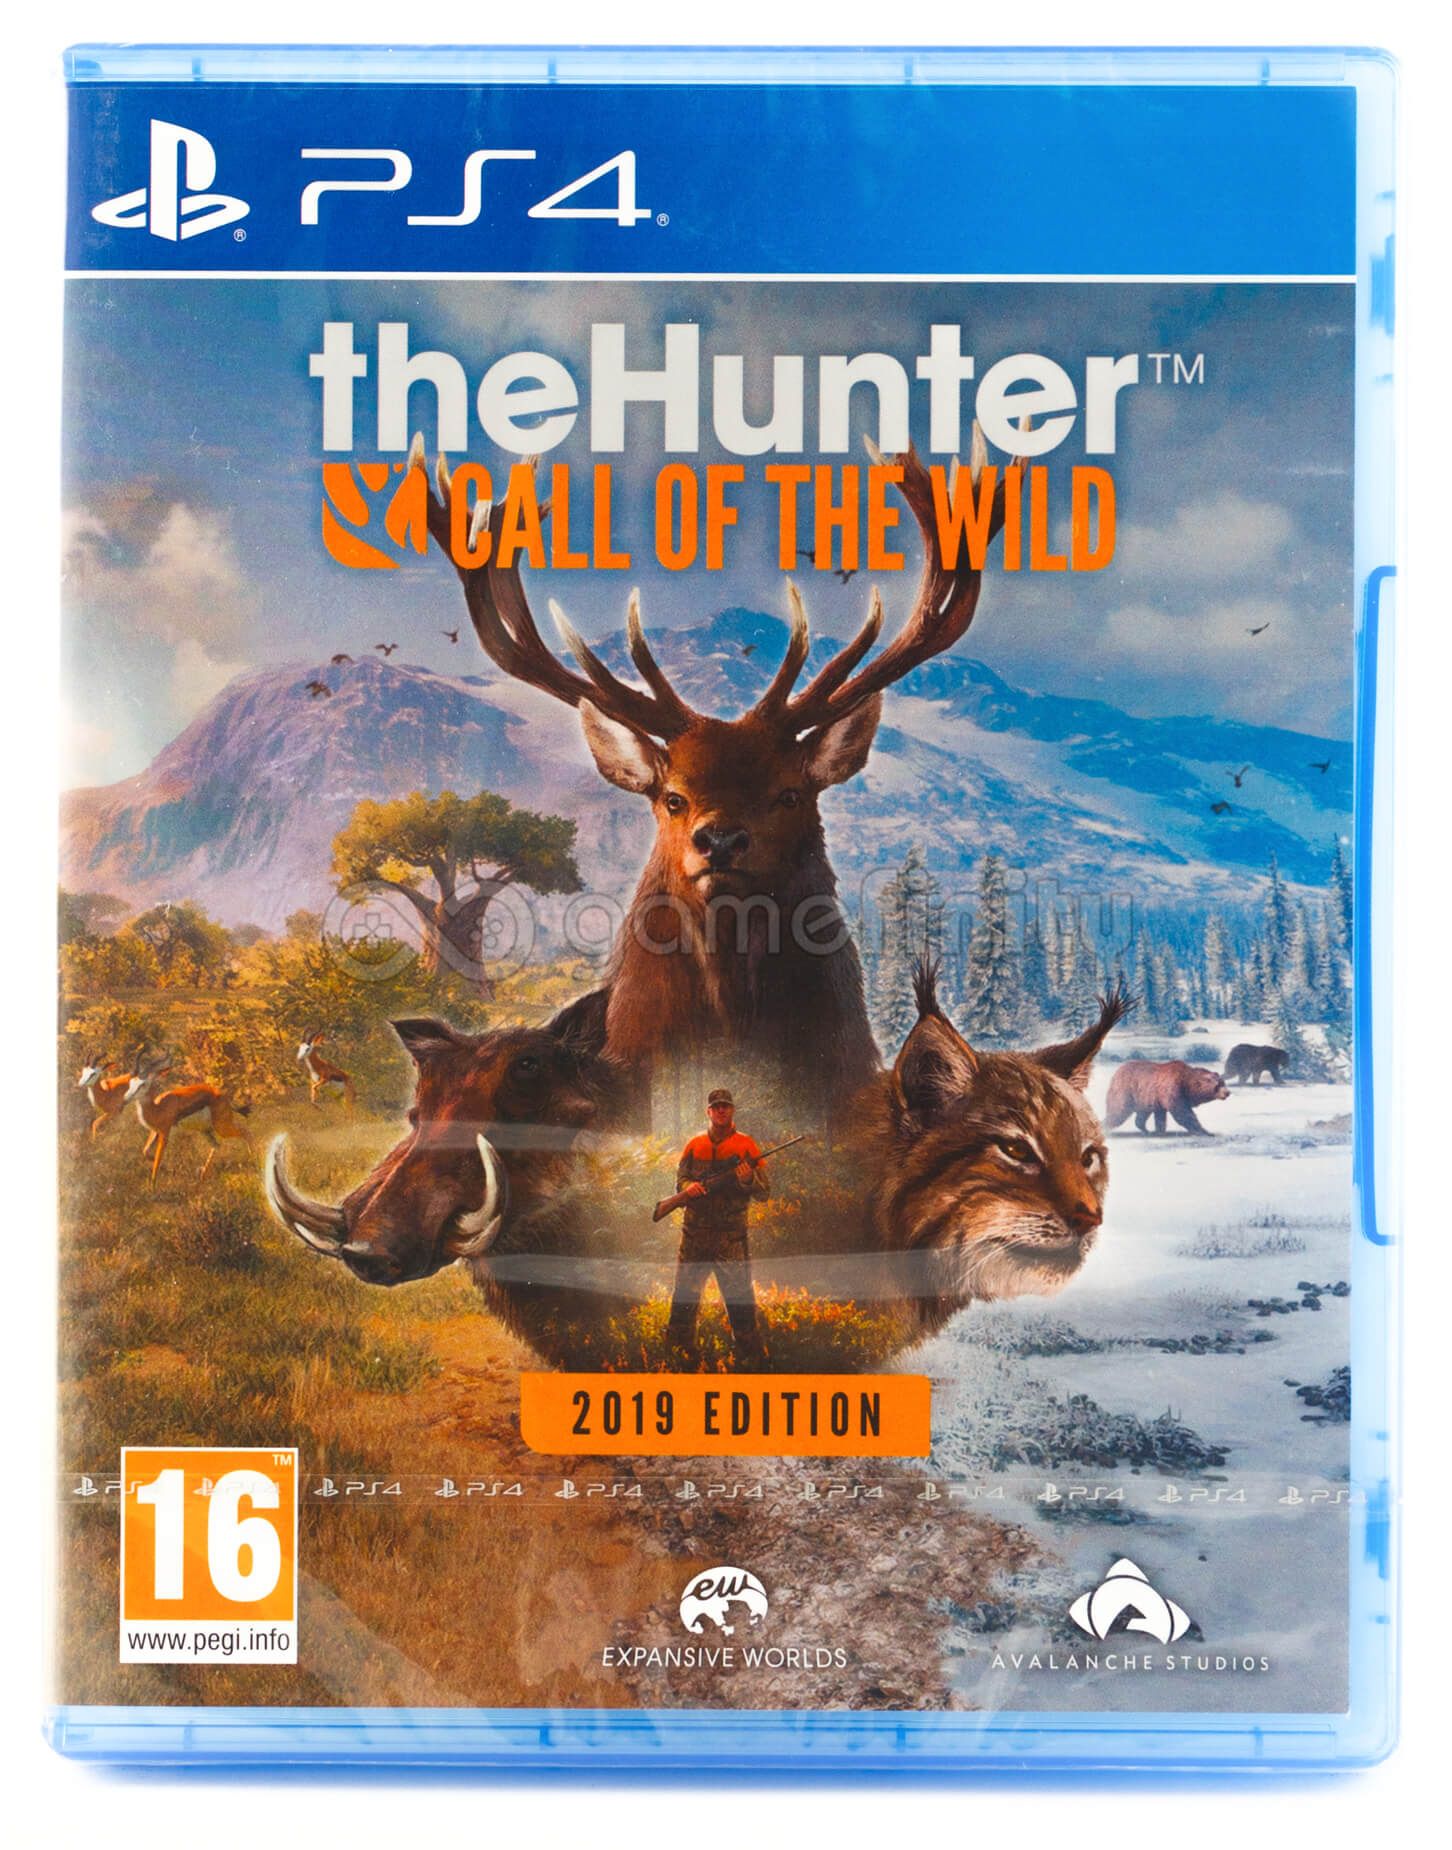 Wild ps4. The Hunter Call of the Wild ps4. The Hunter Call of the Wild обложка. Диск the Hunter Call of the Wild ps4 обзор. The Hunter Call of the Wild купить.